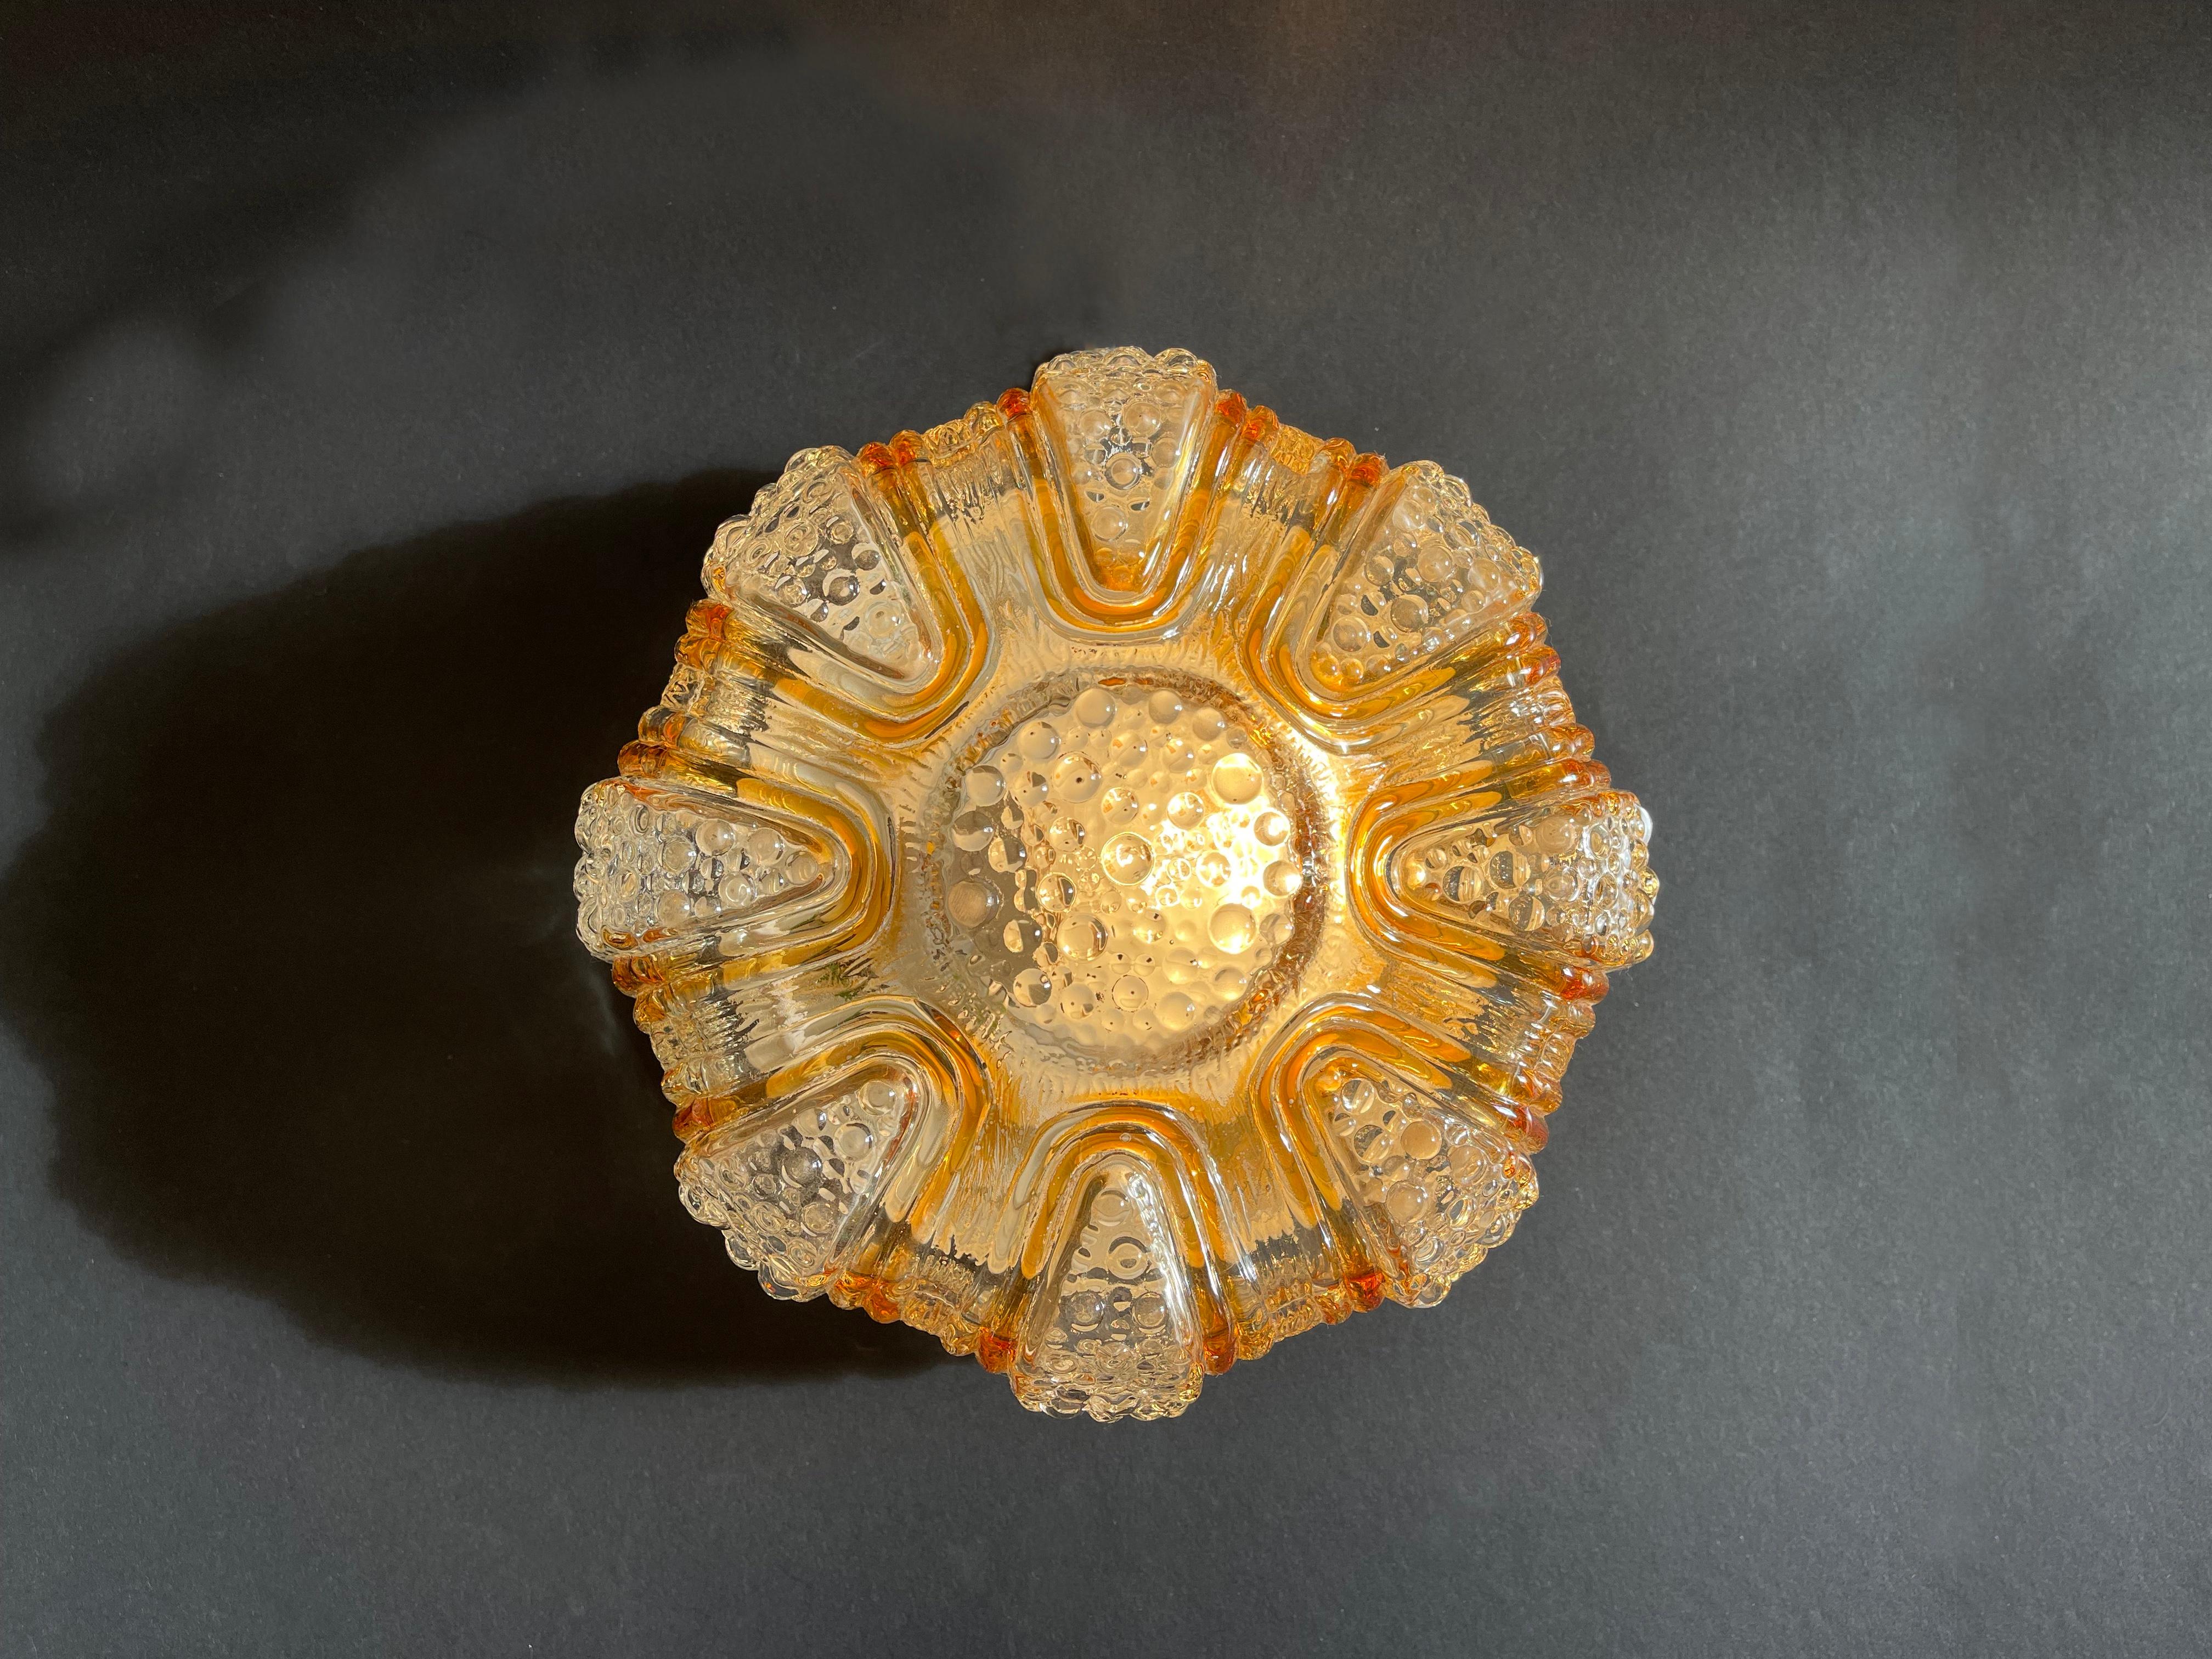 Beautifully designed wall or ceiling lamp in the style of Finnish mid-century artist Helena Tynell.
Amber & gold coloured 'lava stream' running down the sides past bubbles arranged in a round shape, sitting on a flush mount metal base.
Fantastic